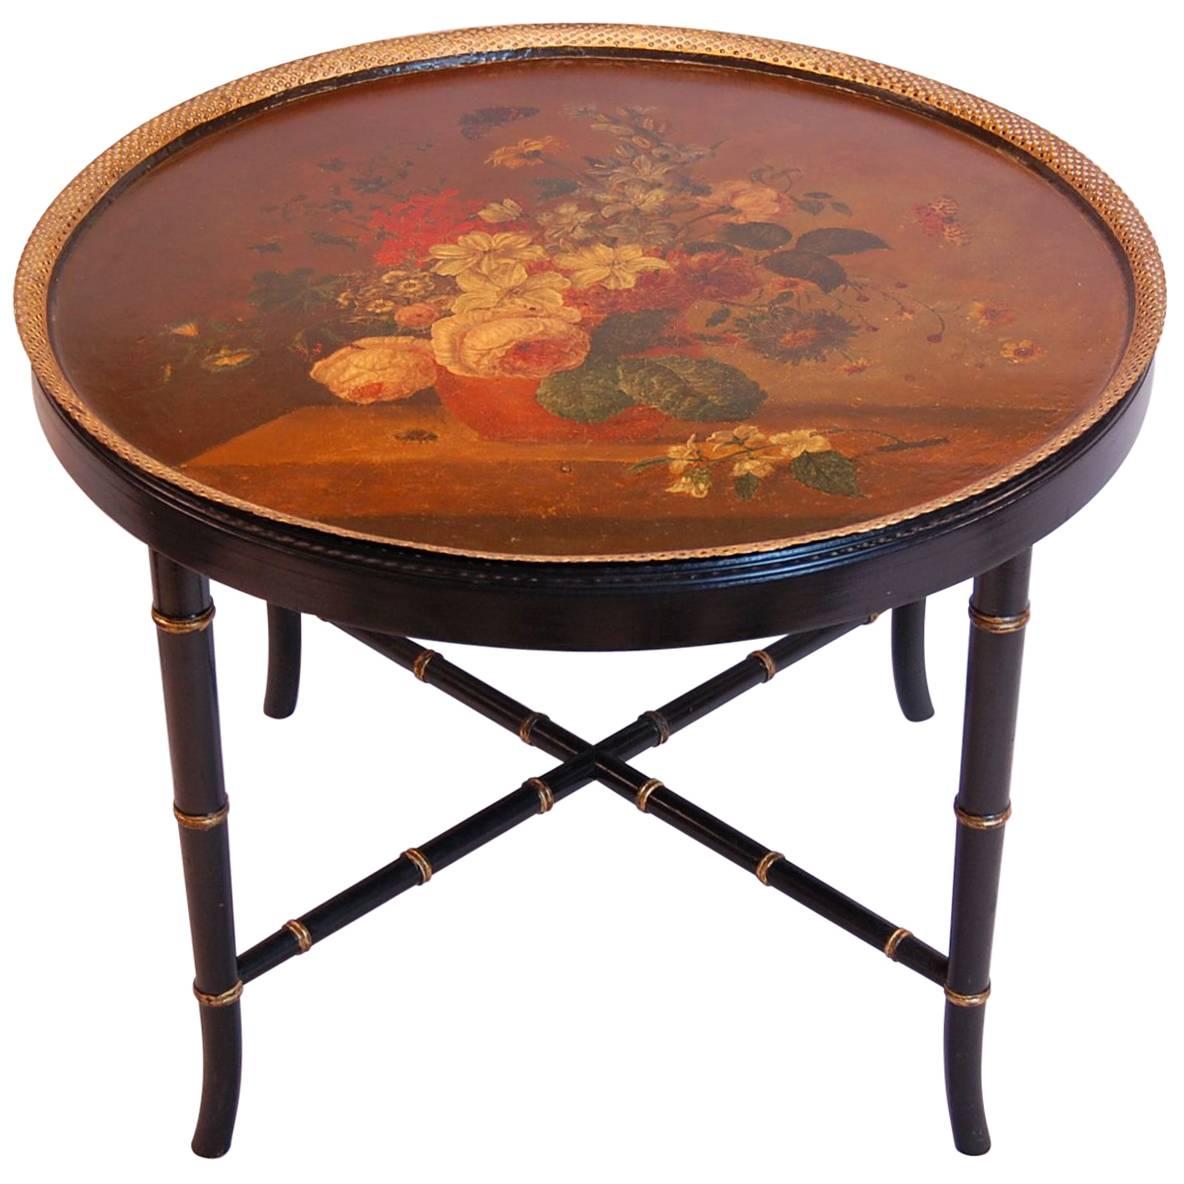 Large Floral Painted Circular Tole Tray on Black Lacquered Base, circa 1860